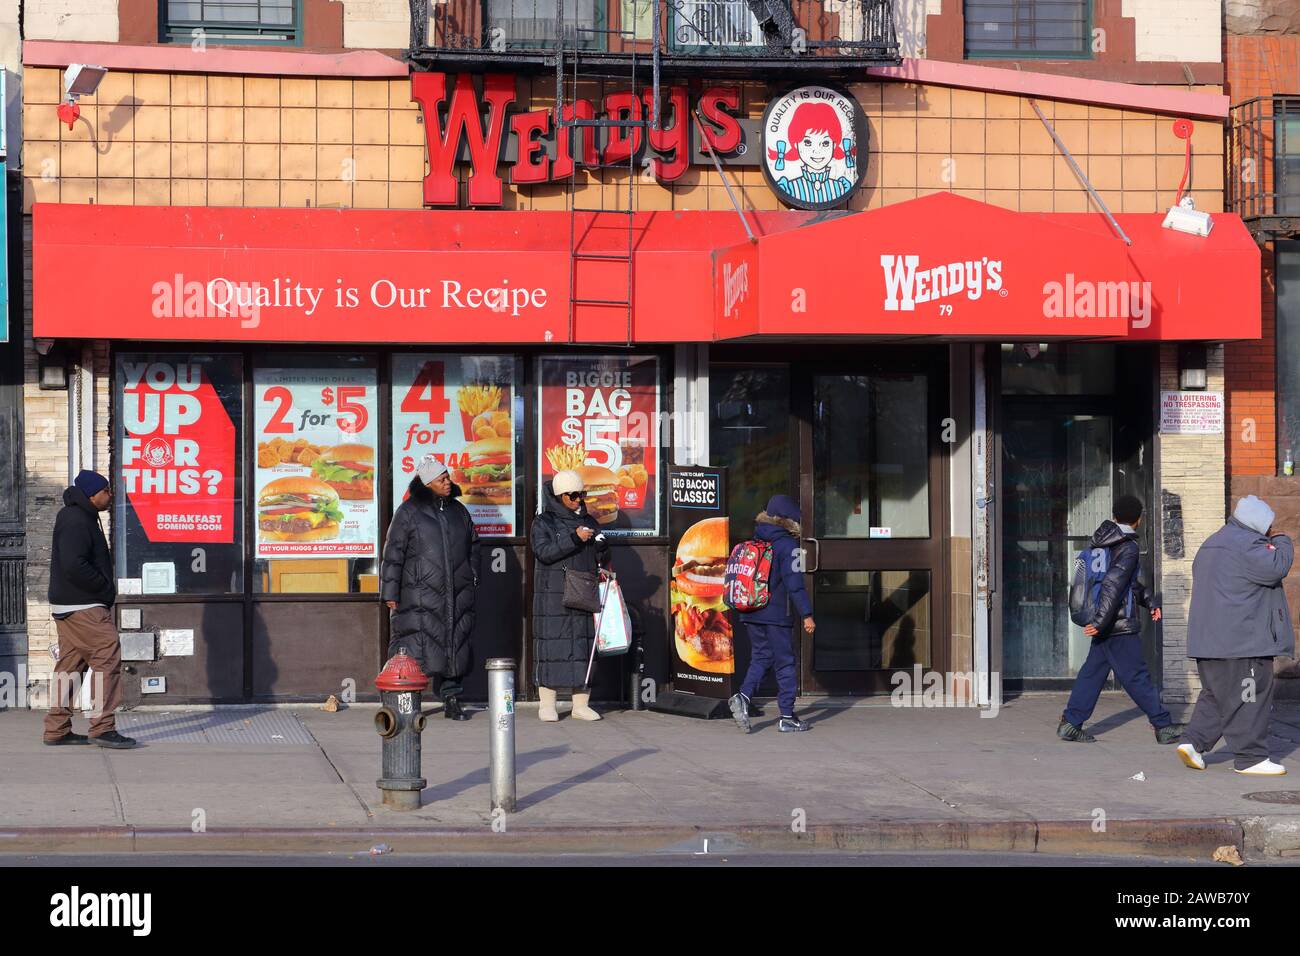 [historical storefront] Wendy's, 79 E 125th St, New York, NYC storefront photo of a fast food restaurant in Harlem, Manhattan Stock Photo